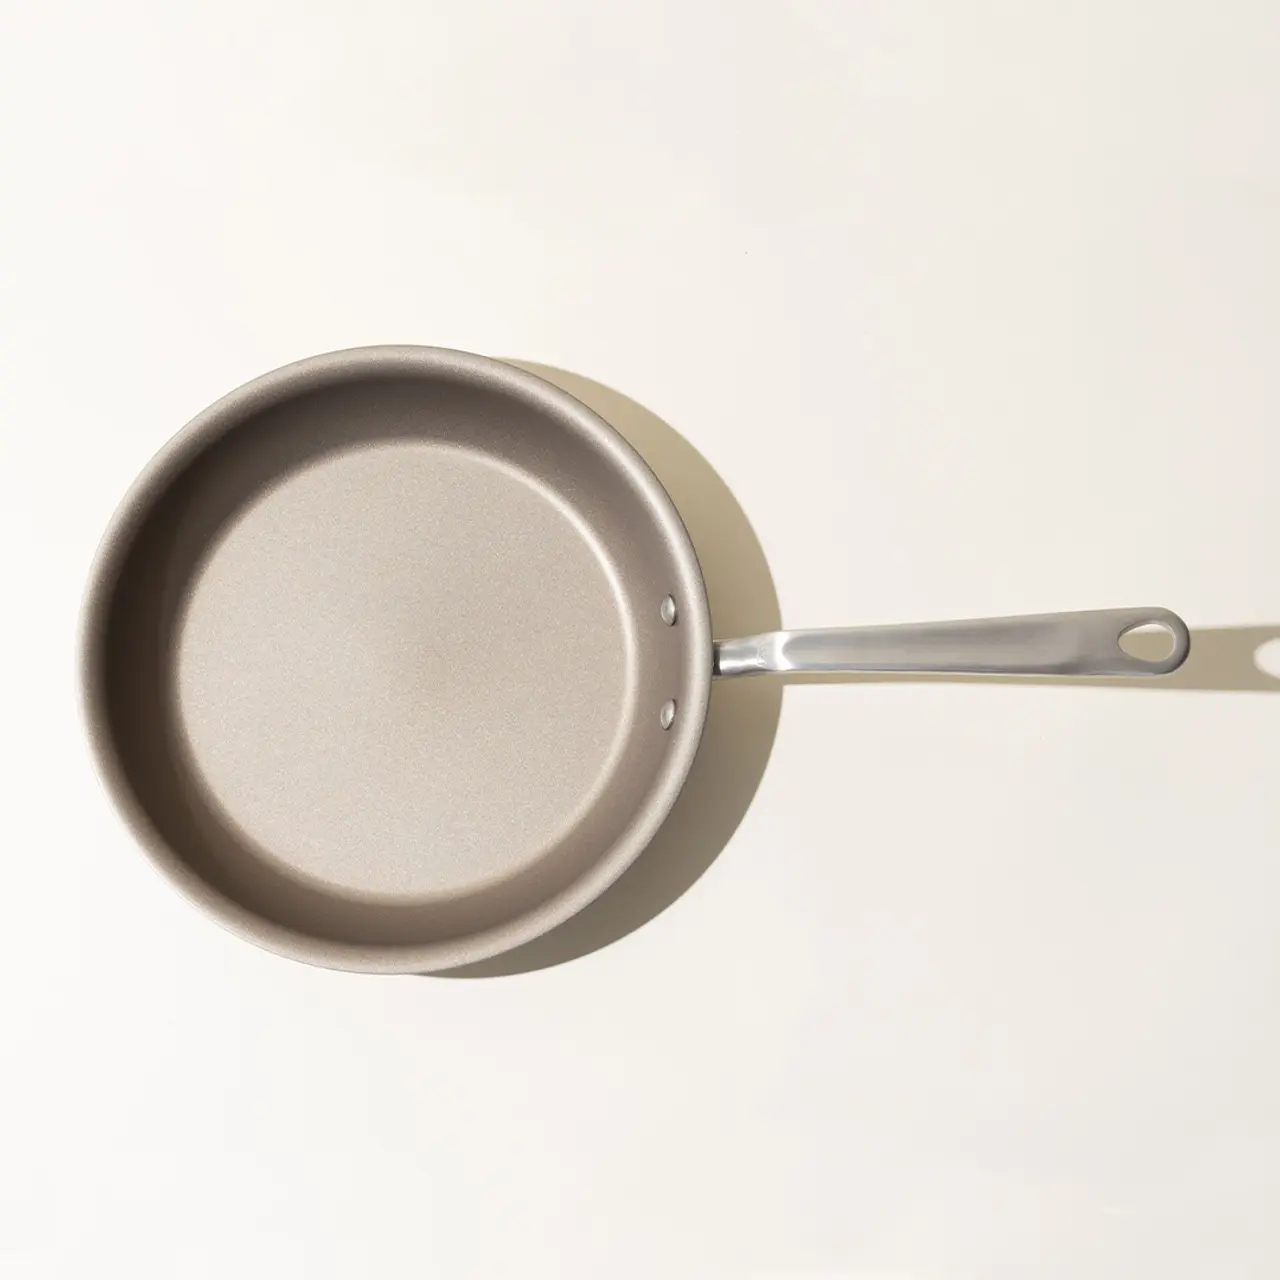 A non-stick frying pan with a silver handle, viewed from above on a light background.